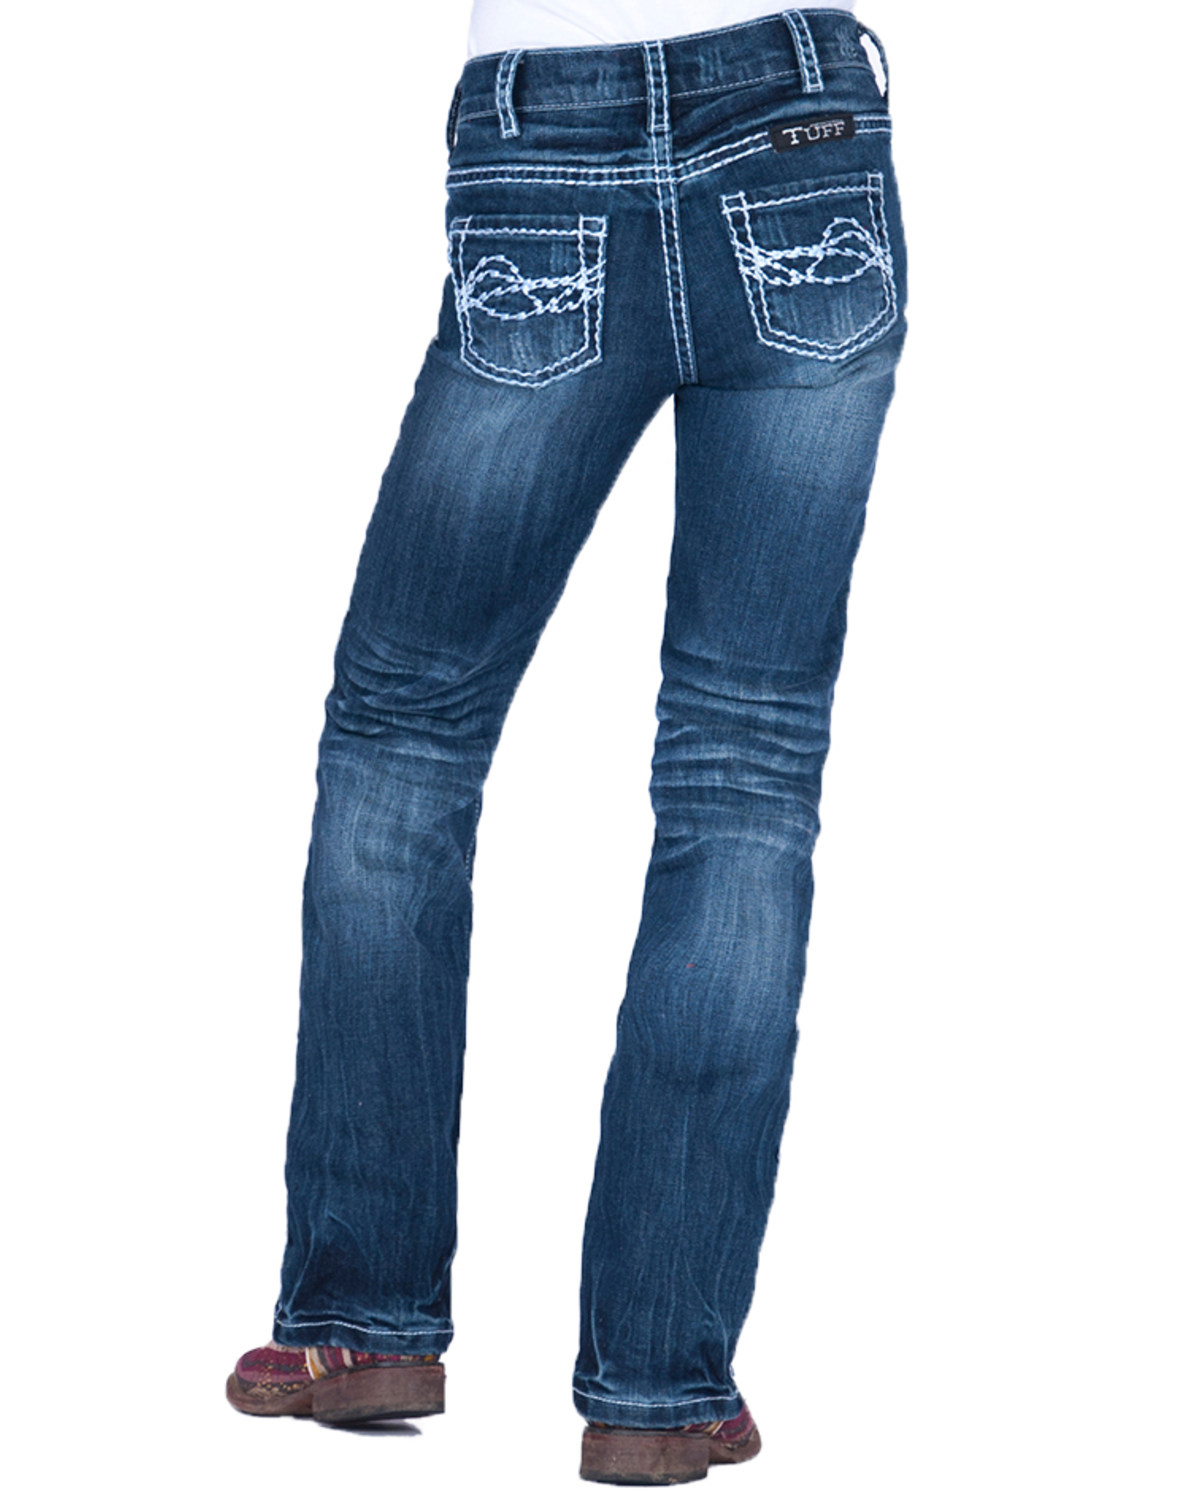 Cowgirl Tuff Girls' Edgy Bootcut Jeans